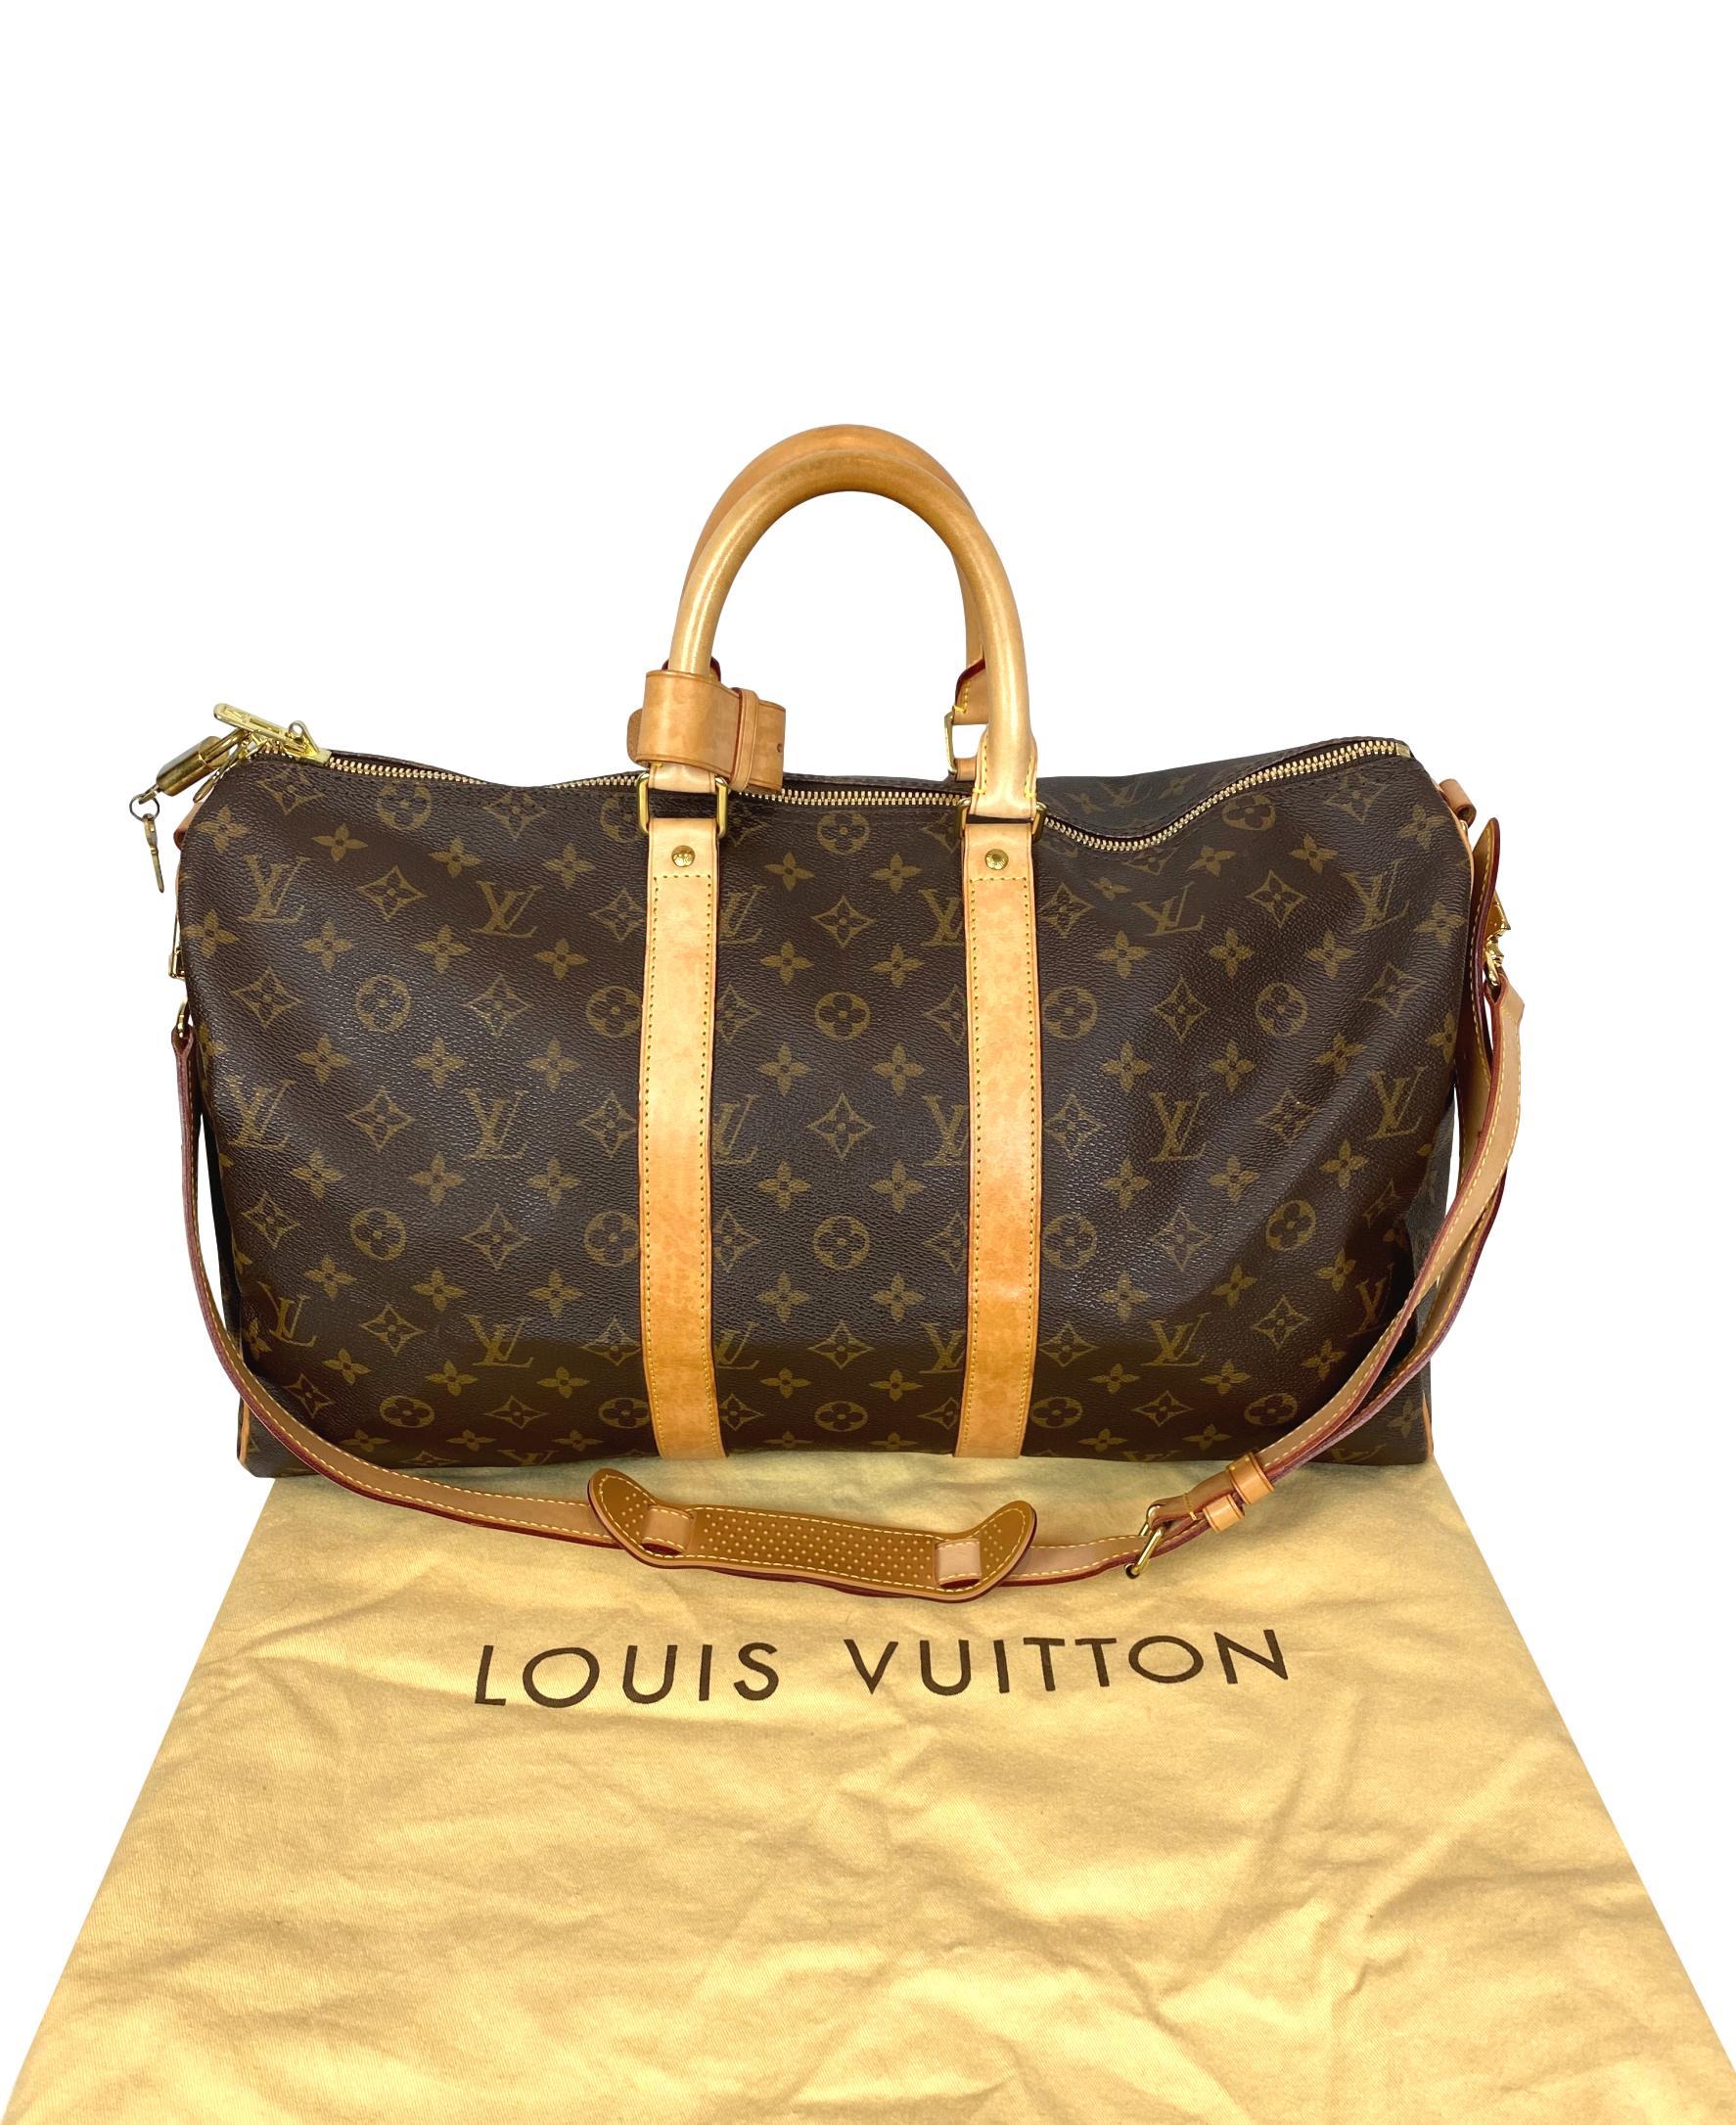 Louis Vuitton Monogram Keepall 45 Bandouliere Duffelbag, France 2010. This iconic keepall was first introduced in the 1930's by Gaston Vuitton as the city 